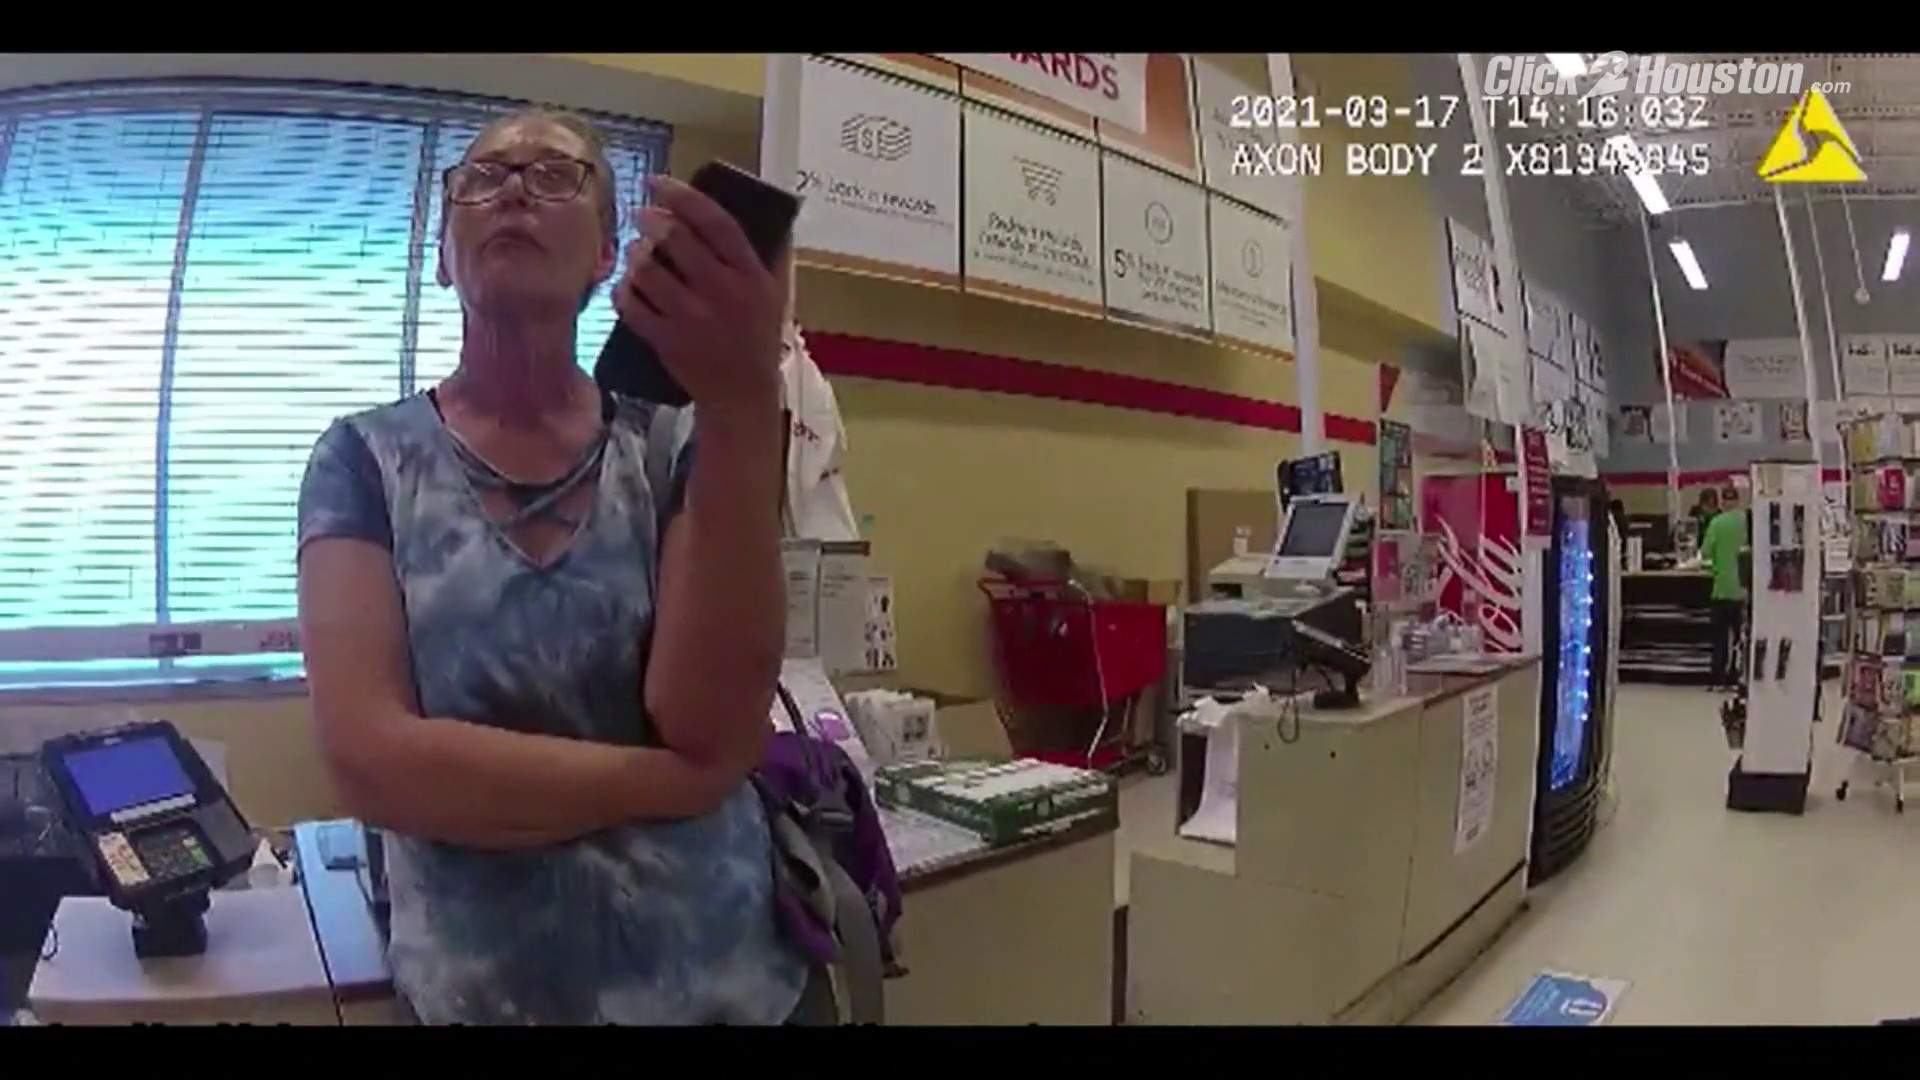 Bodycam footage shows the second arrest of the maskless woman, this time in the Texas City store